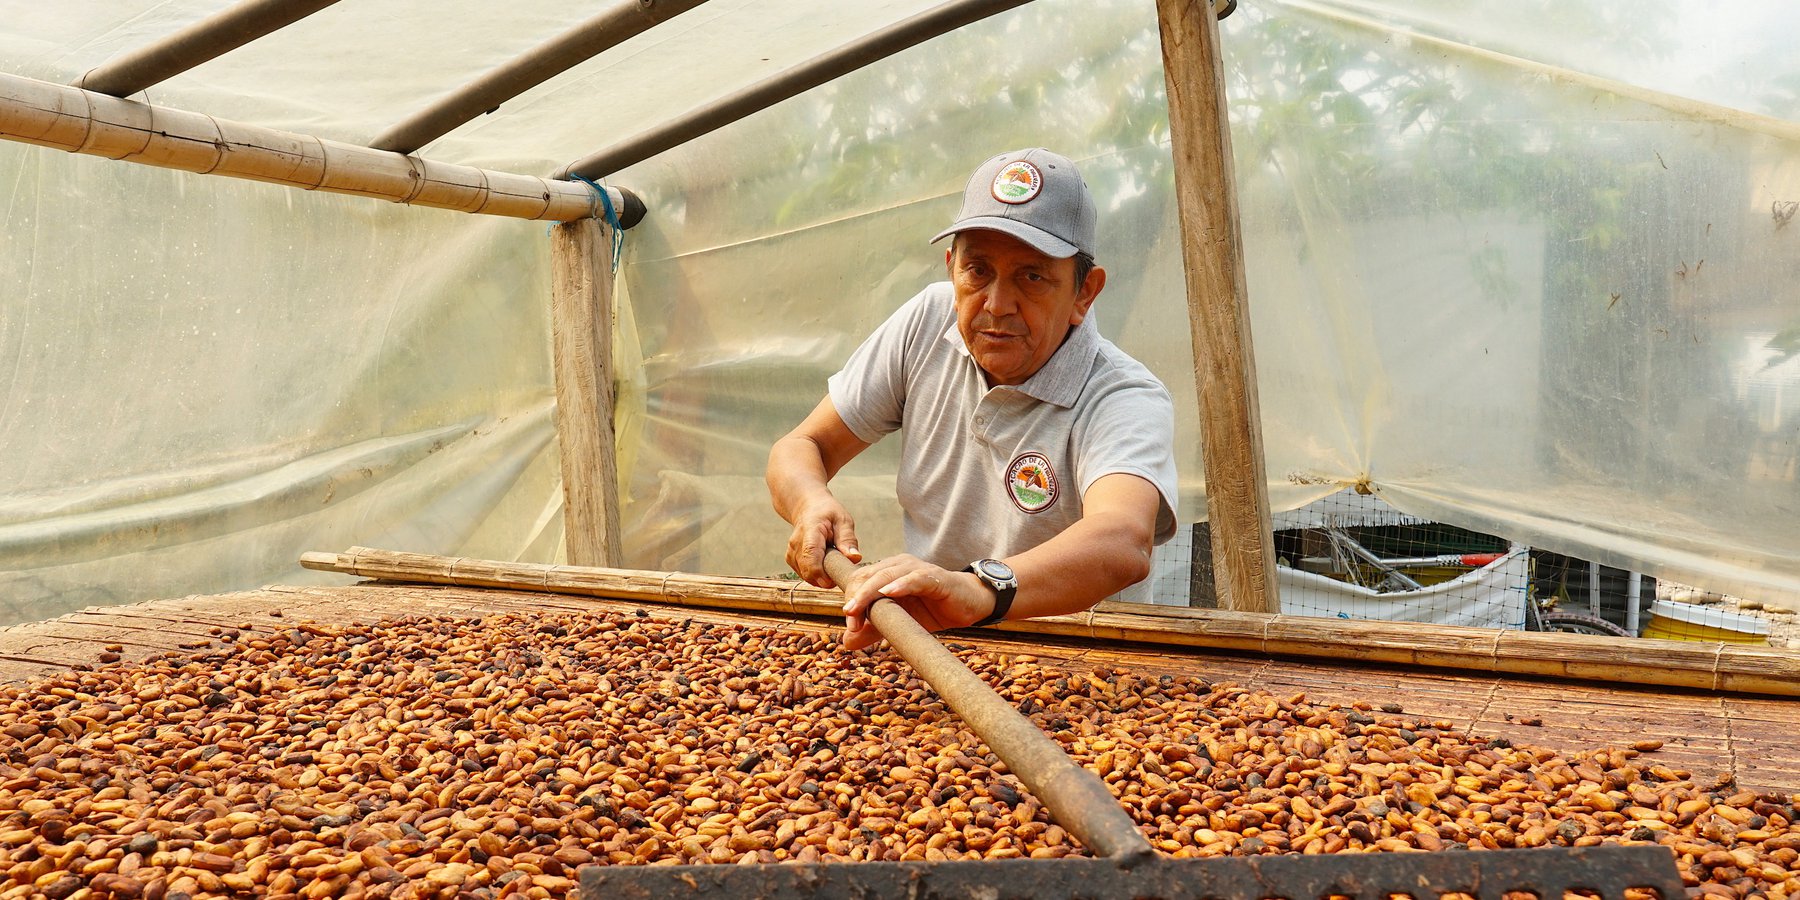 The land user, Mr. Rafael Medina, drying cacao beens by spreading them manually under the sun in a greenhouse.